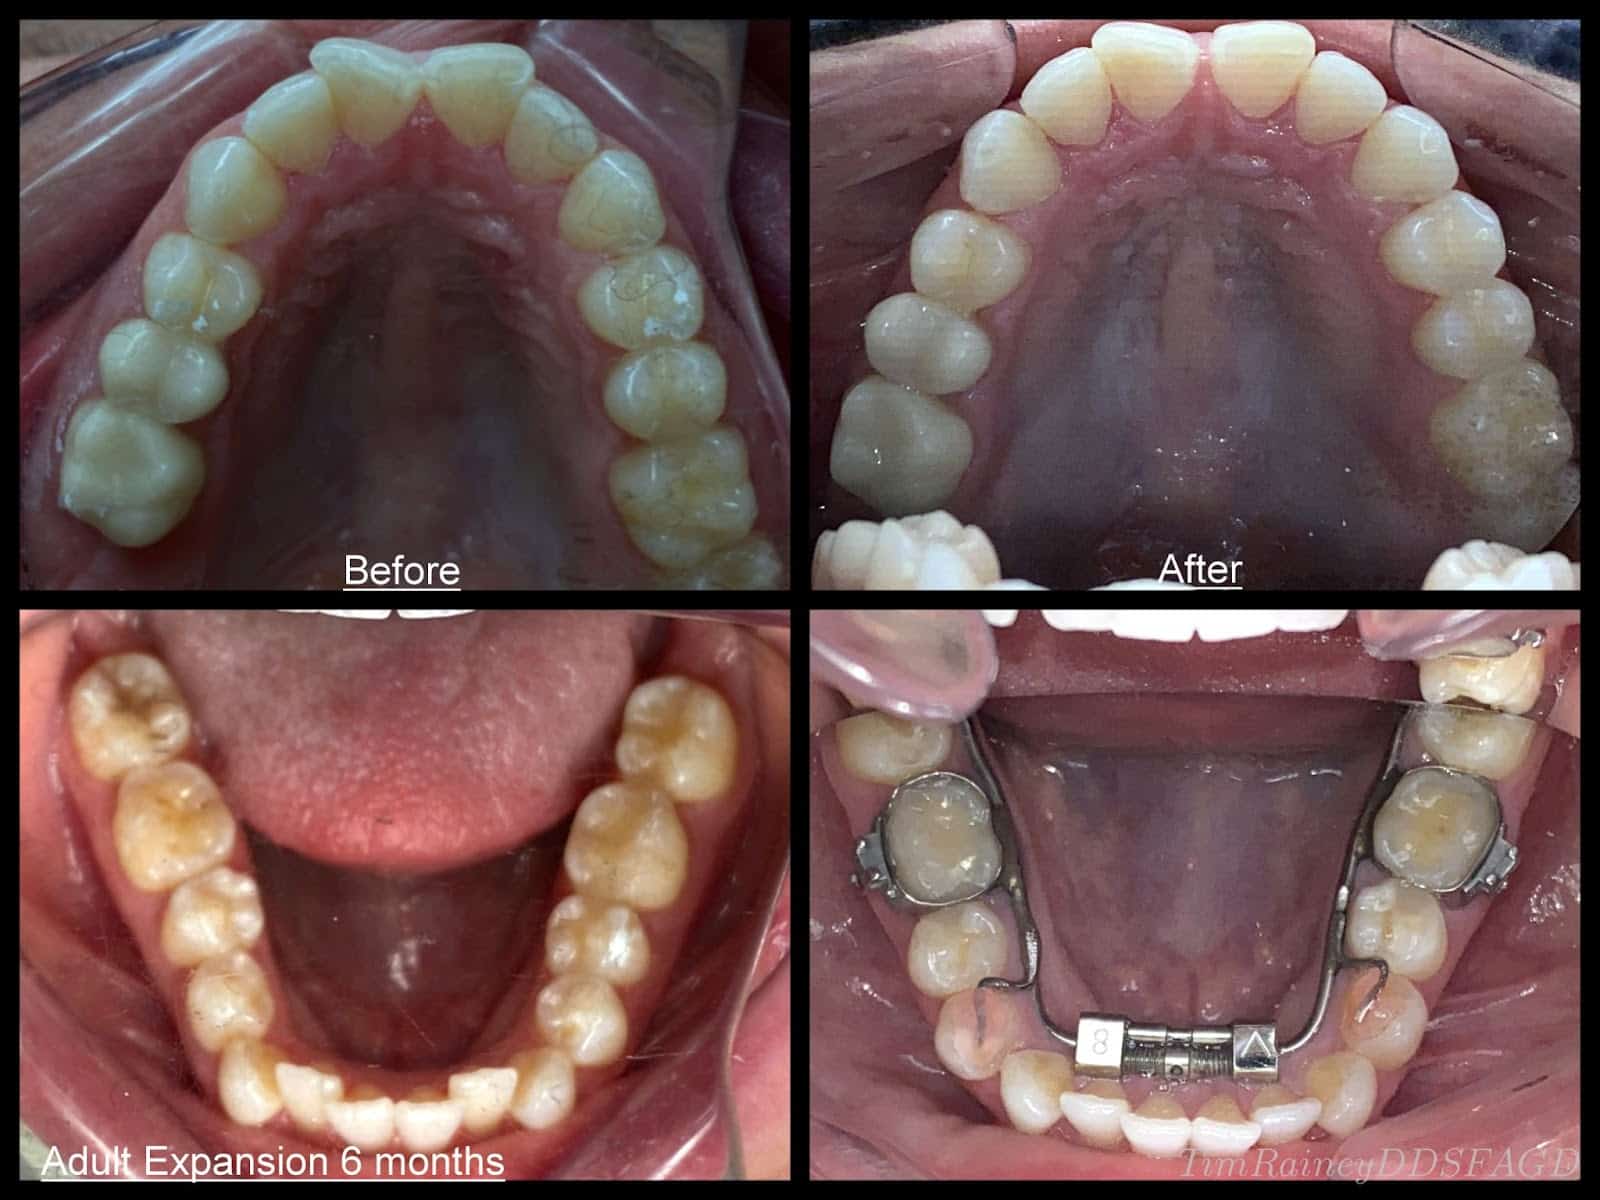 Before and After photos showing an adult mouth using a palatal explander instead of resorting to tooth extraction for their braces.